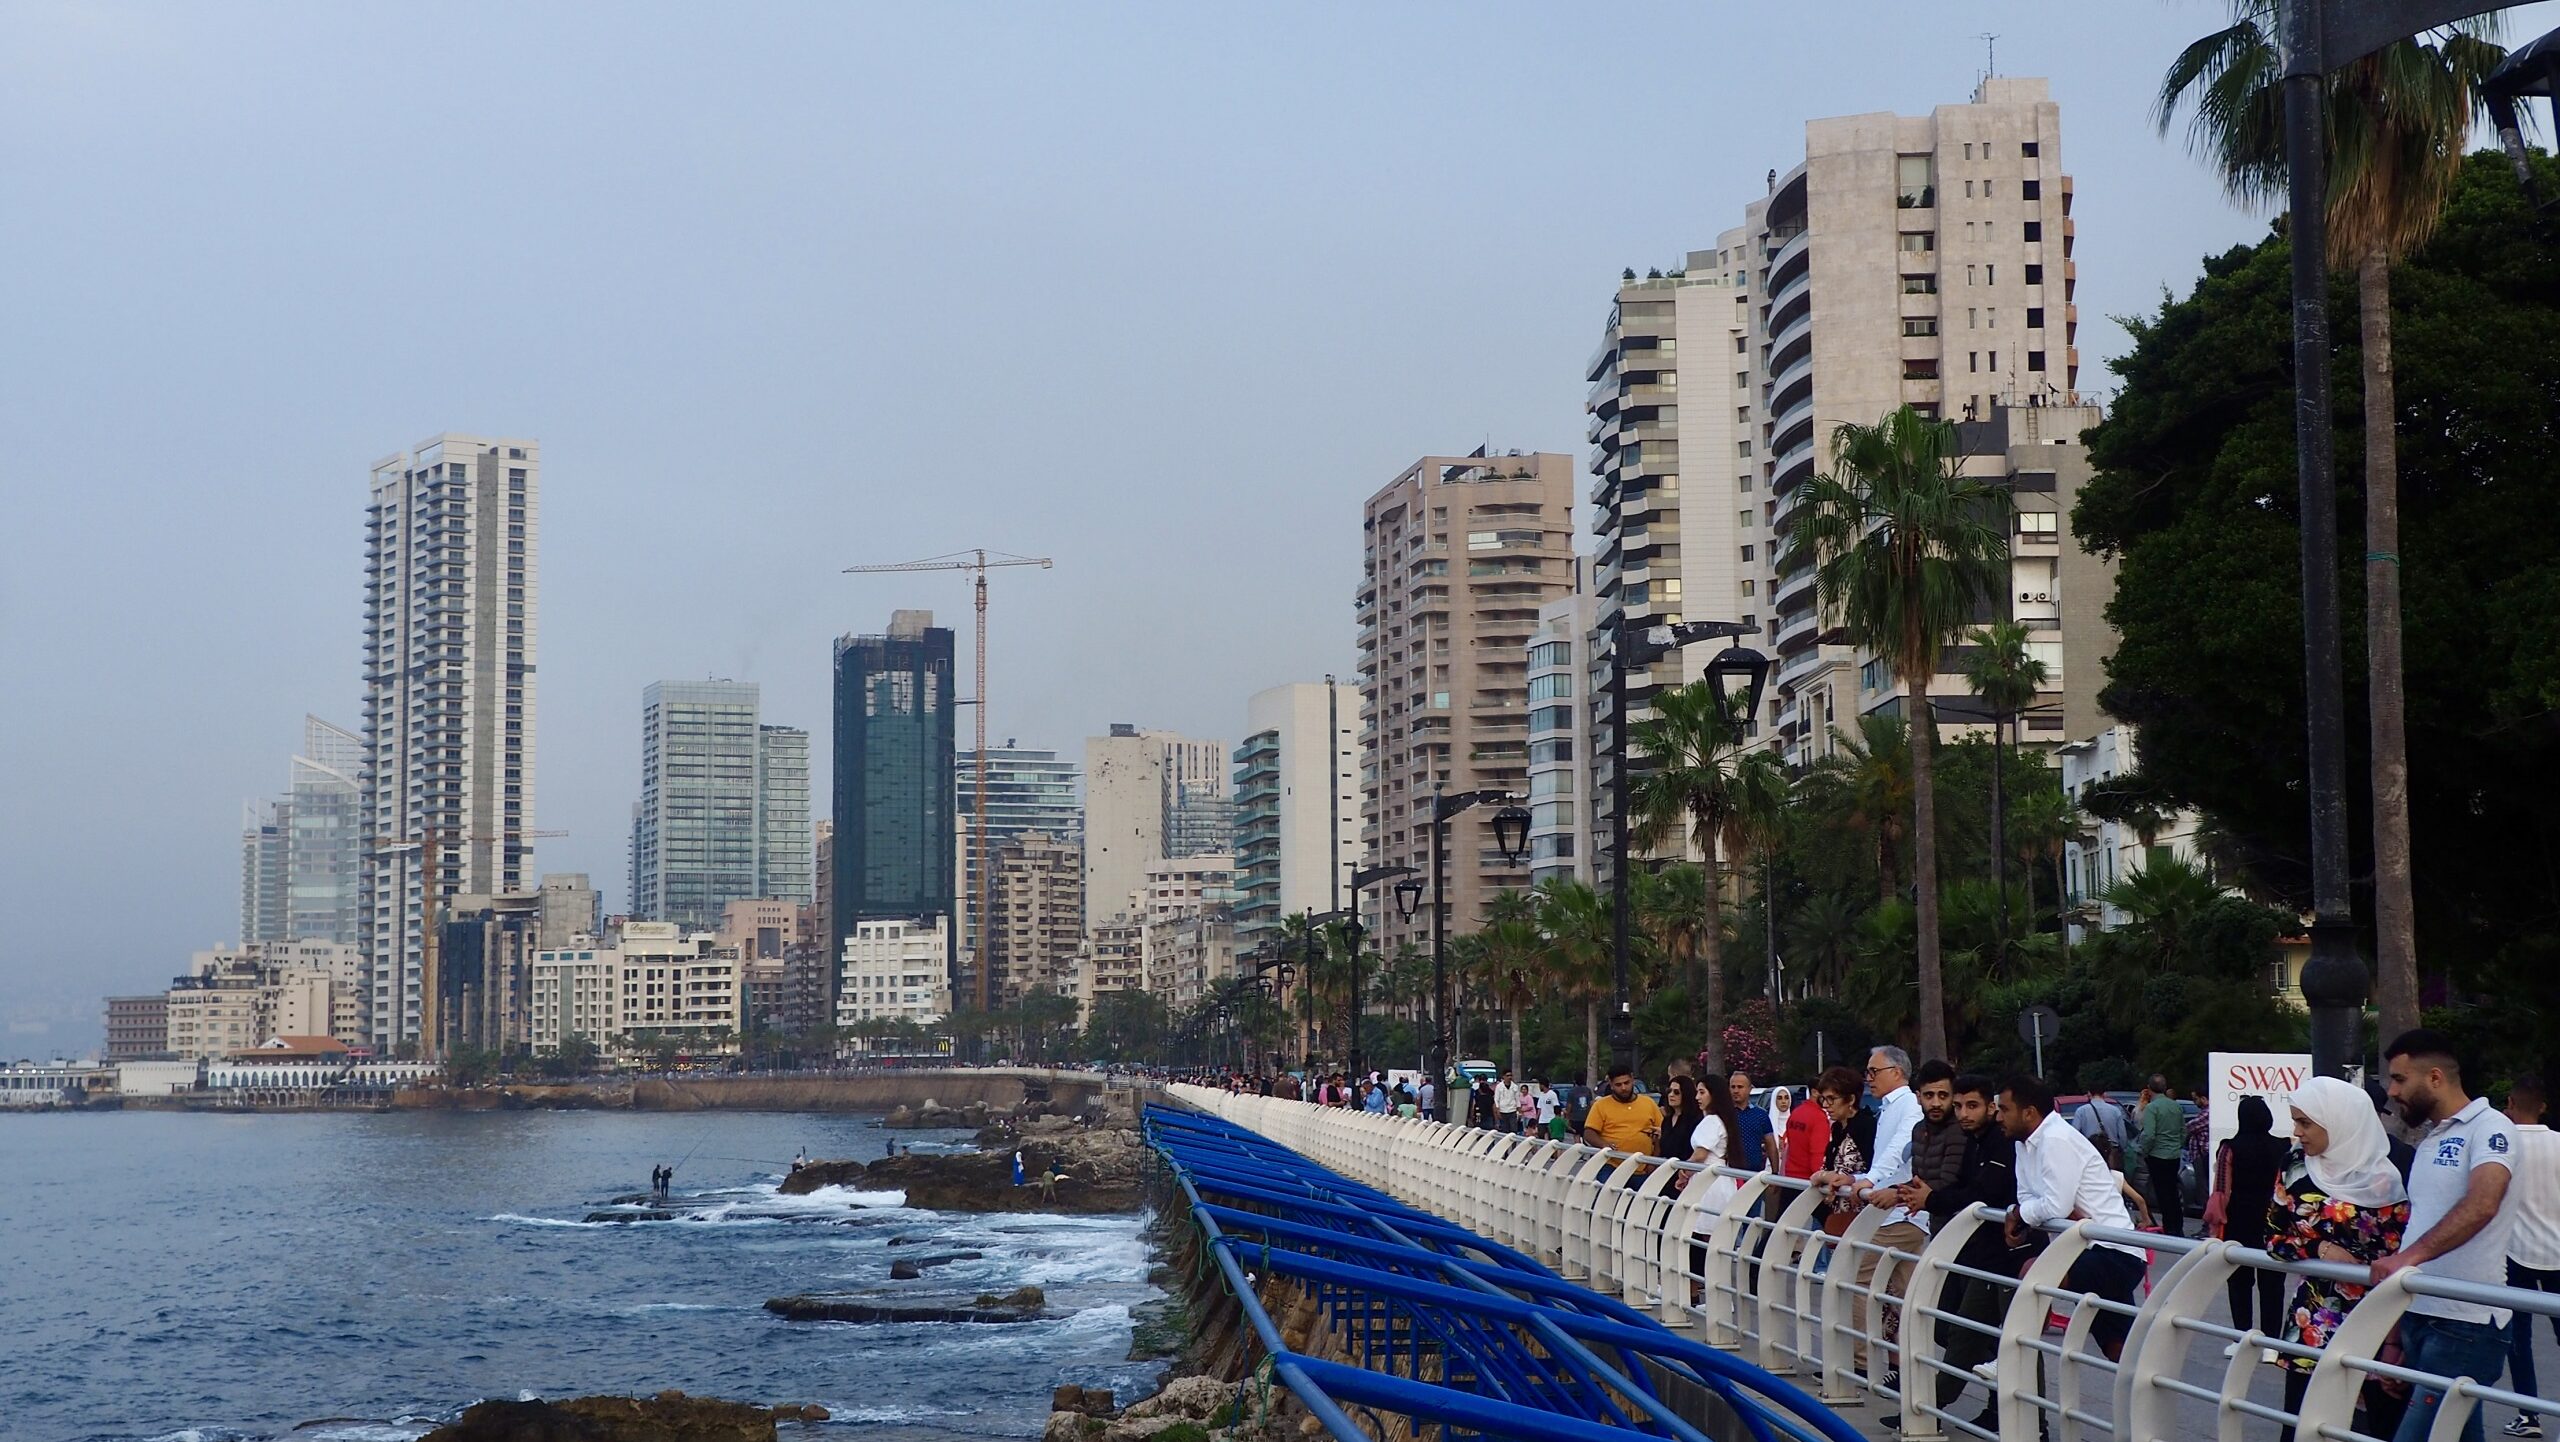 Beirut’s Coastal Crisis: Sea and Society in Conflict